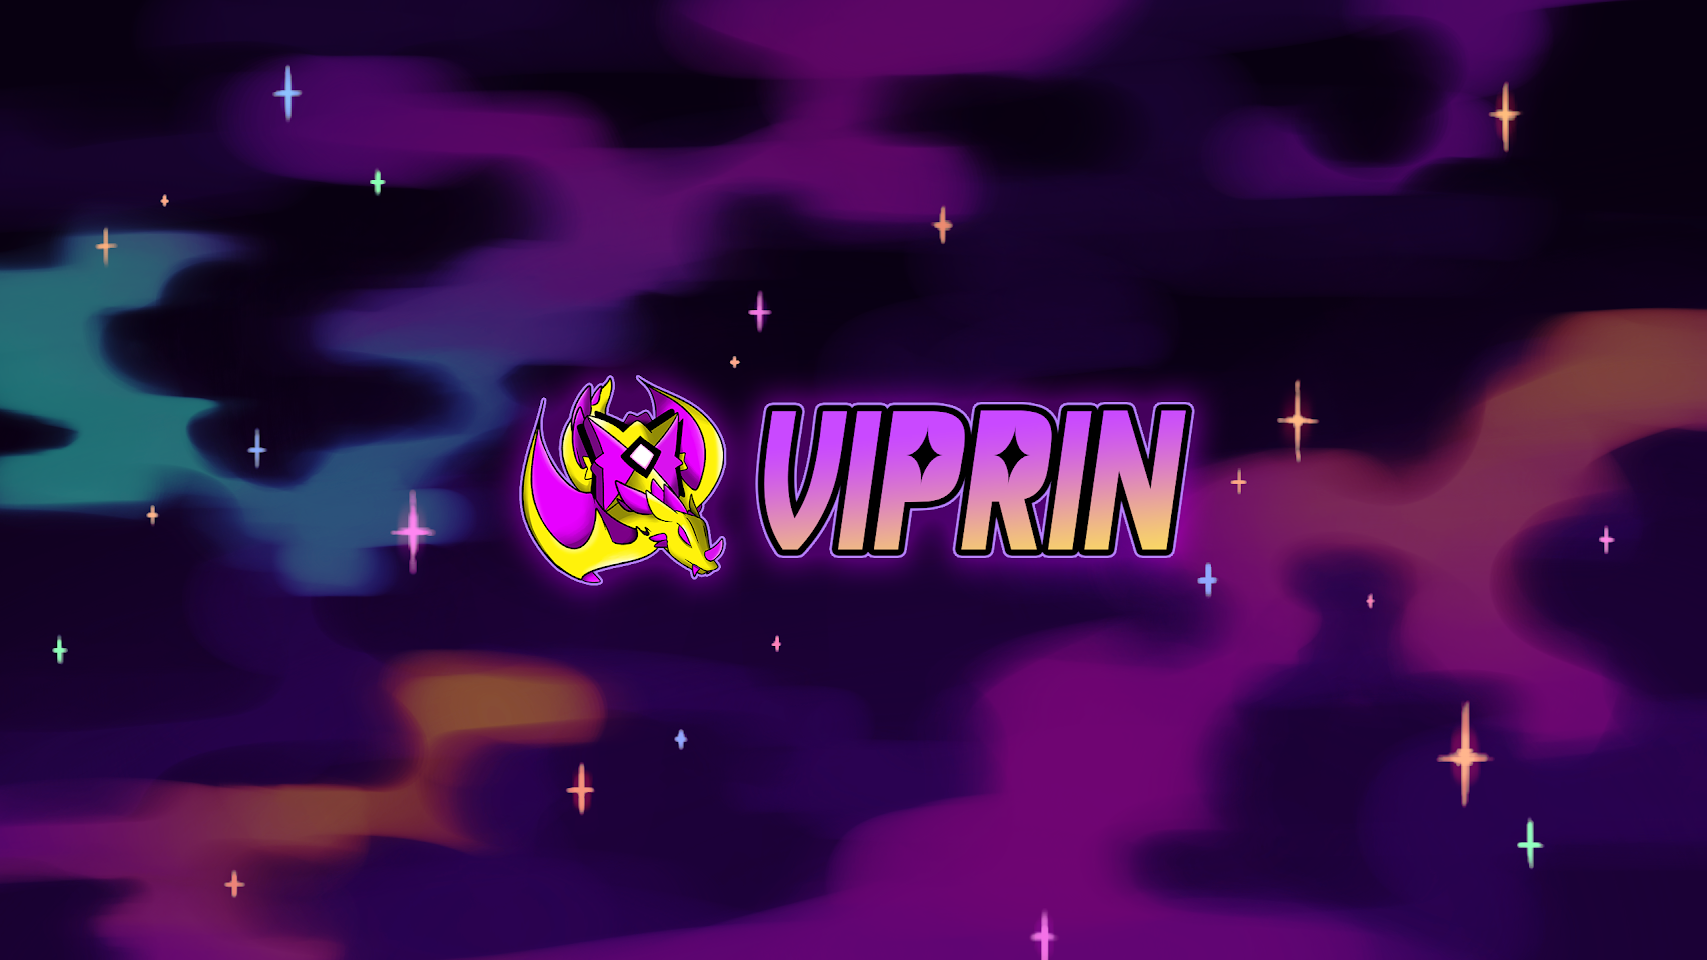 Geometry Dash Elder Moderator Viprin Responds To Allegations About Blackmail, Spyware, and Inappropriate Encounters